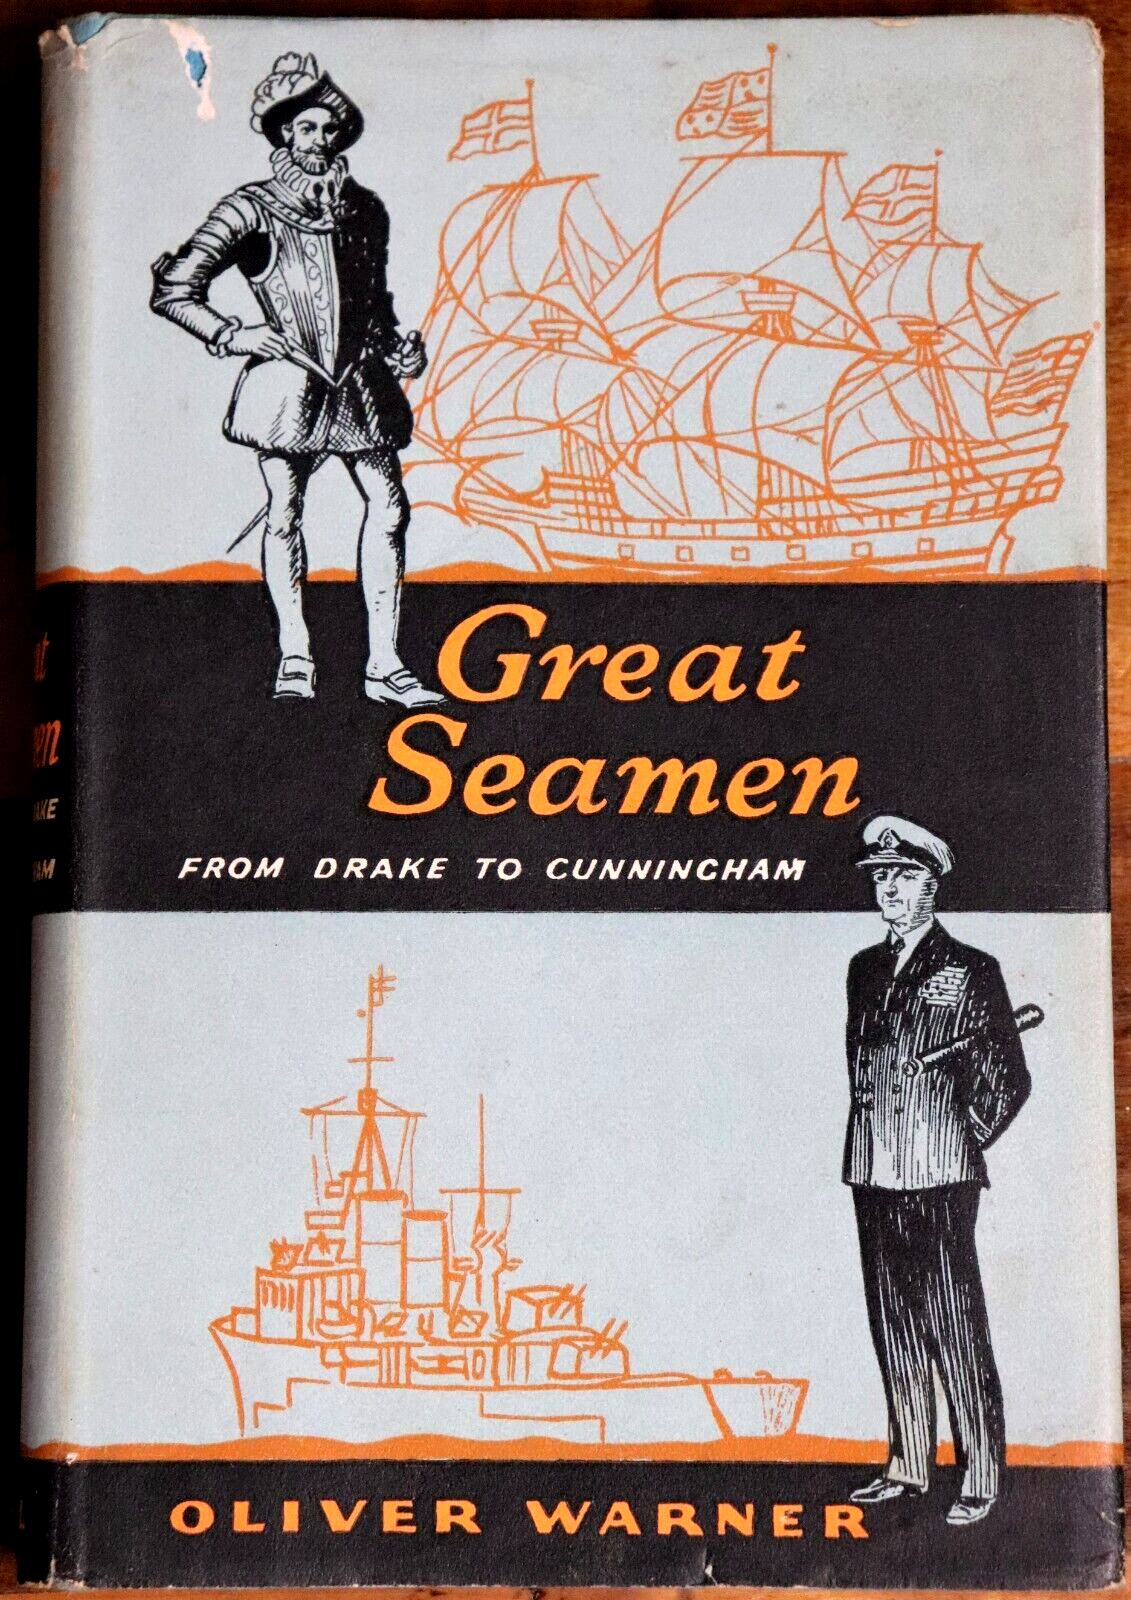 Great Seamen by Oliver Warner - 1961 - 1st Edition Maritime Explorers Book